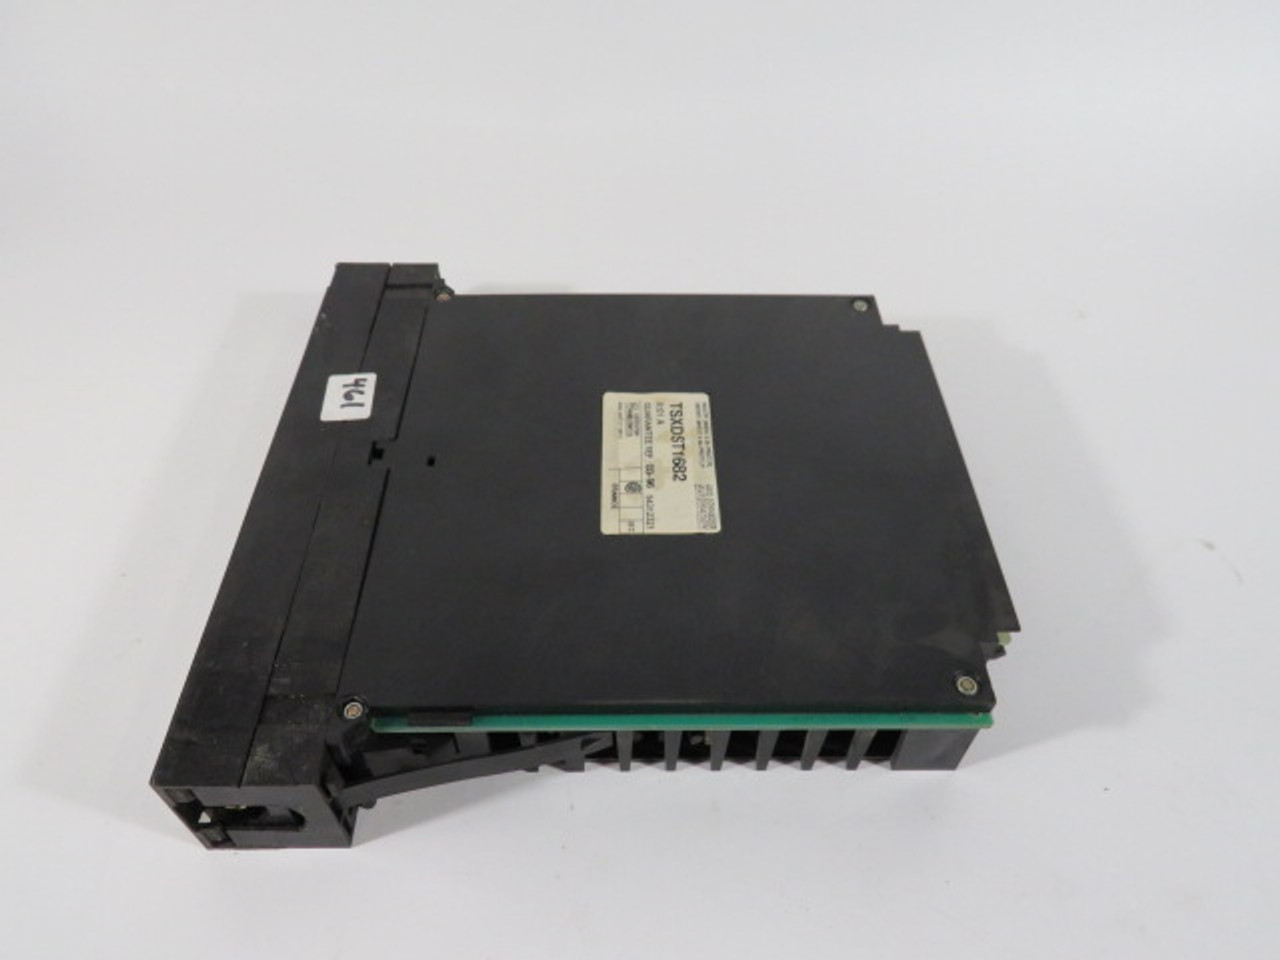 Schneider TSXDST1682 Output Module 24VDC 16 Point 0.5A USED